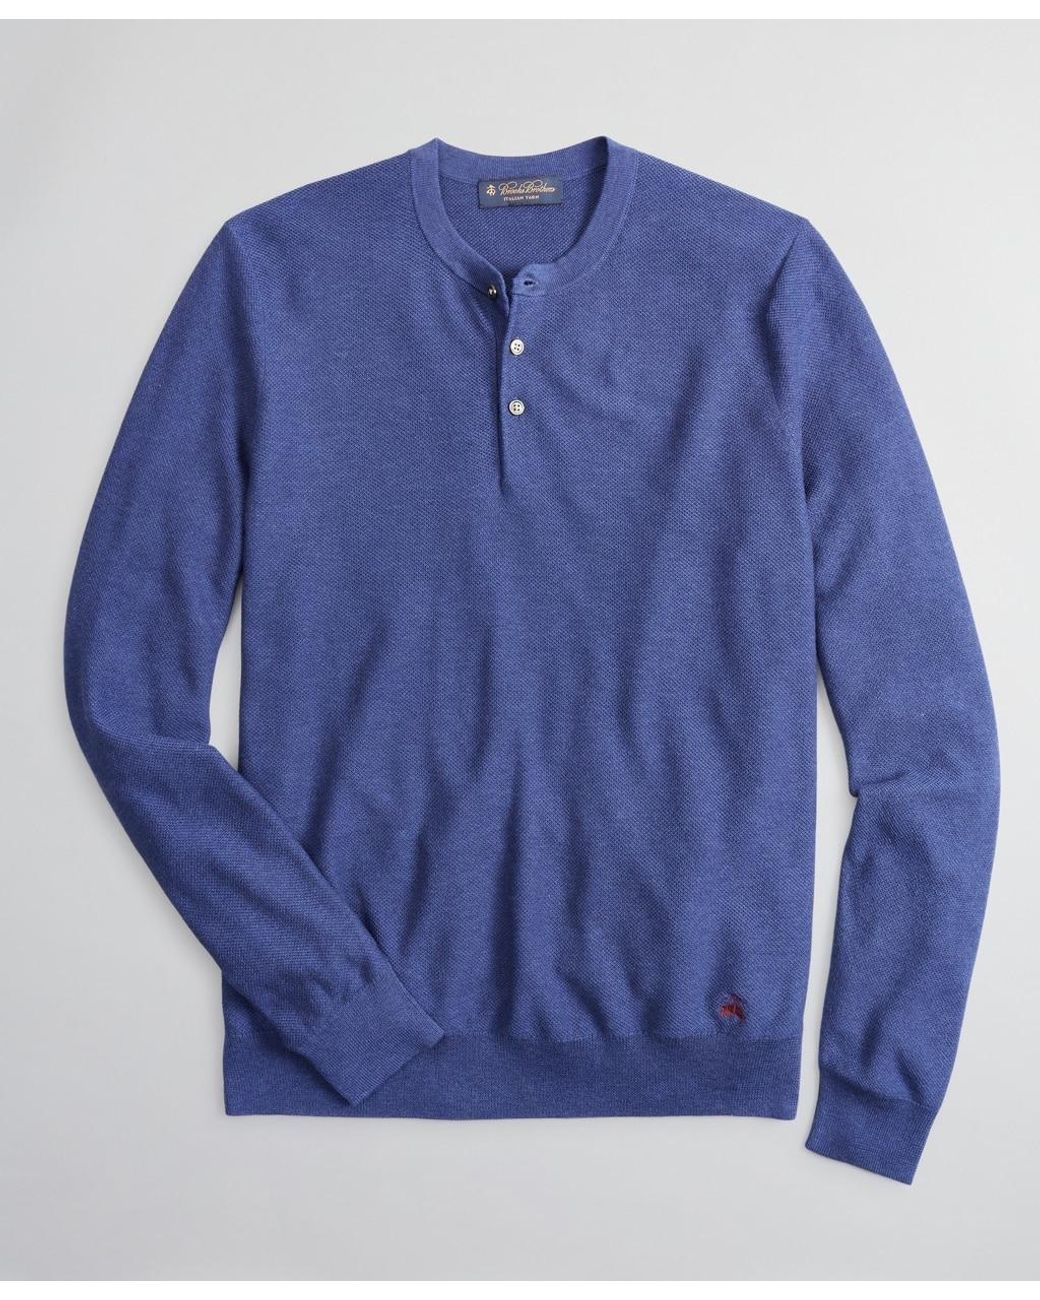 Brooks Brothers Silk And Cotton Henley Sweater in Blue for Men - Lyst